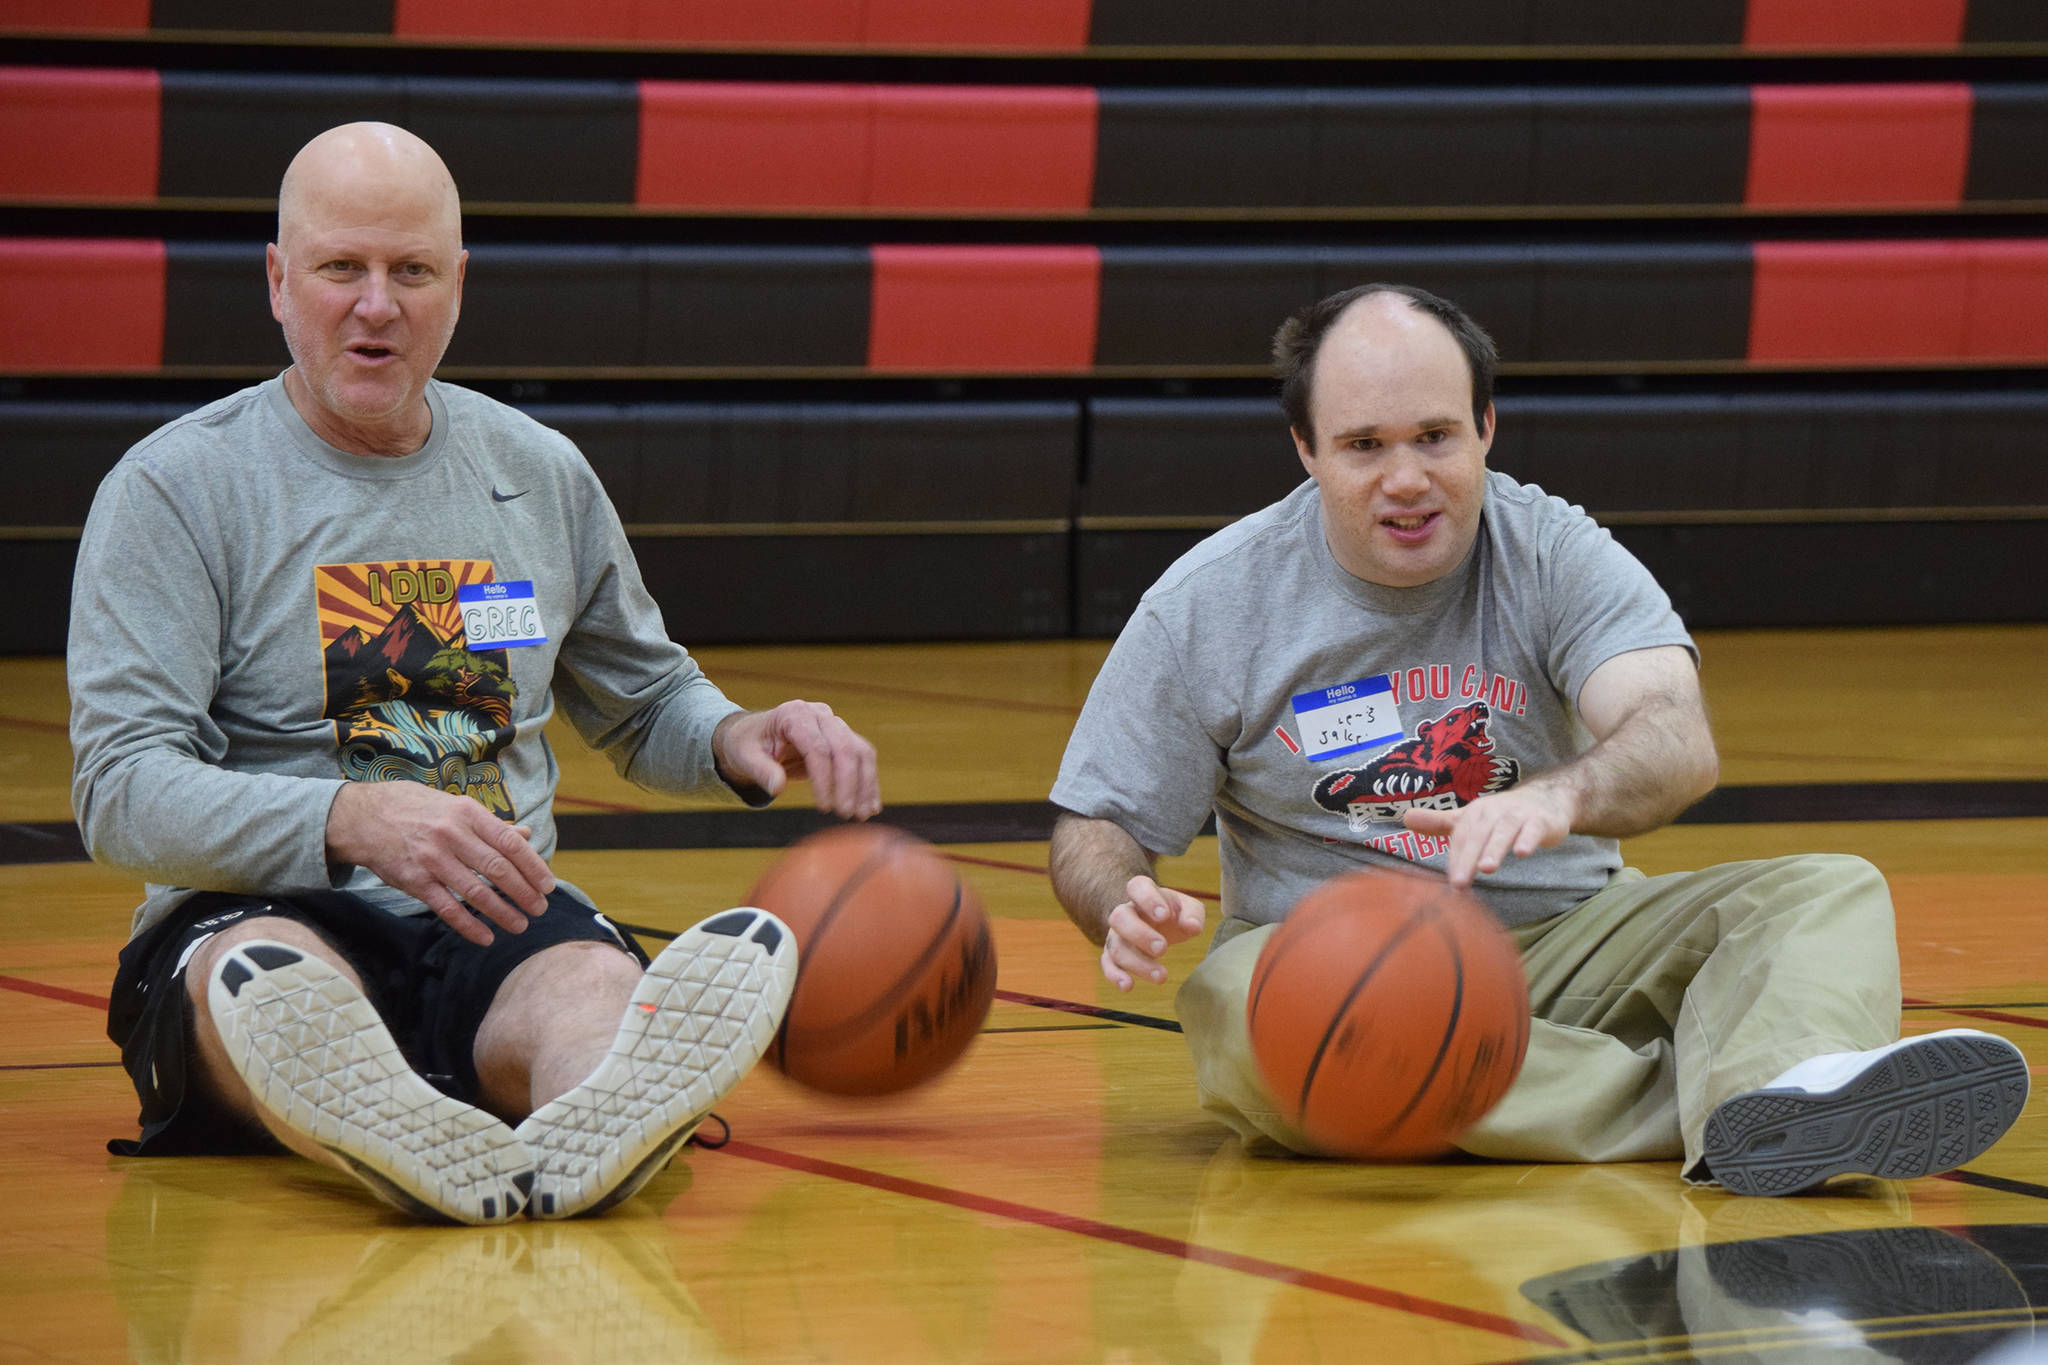 Camp ‘hoops’ in Juneau athletes with disabilities